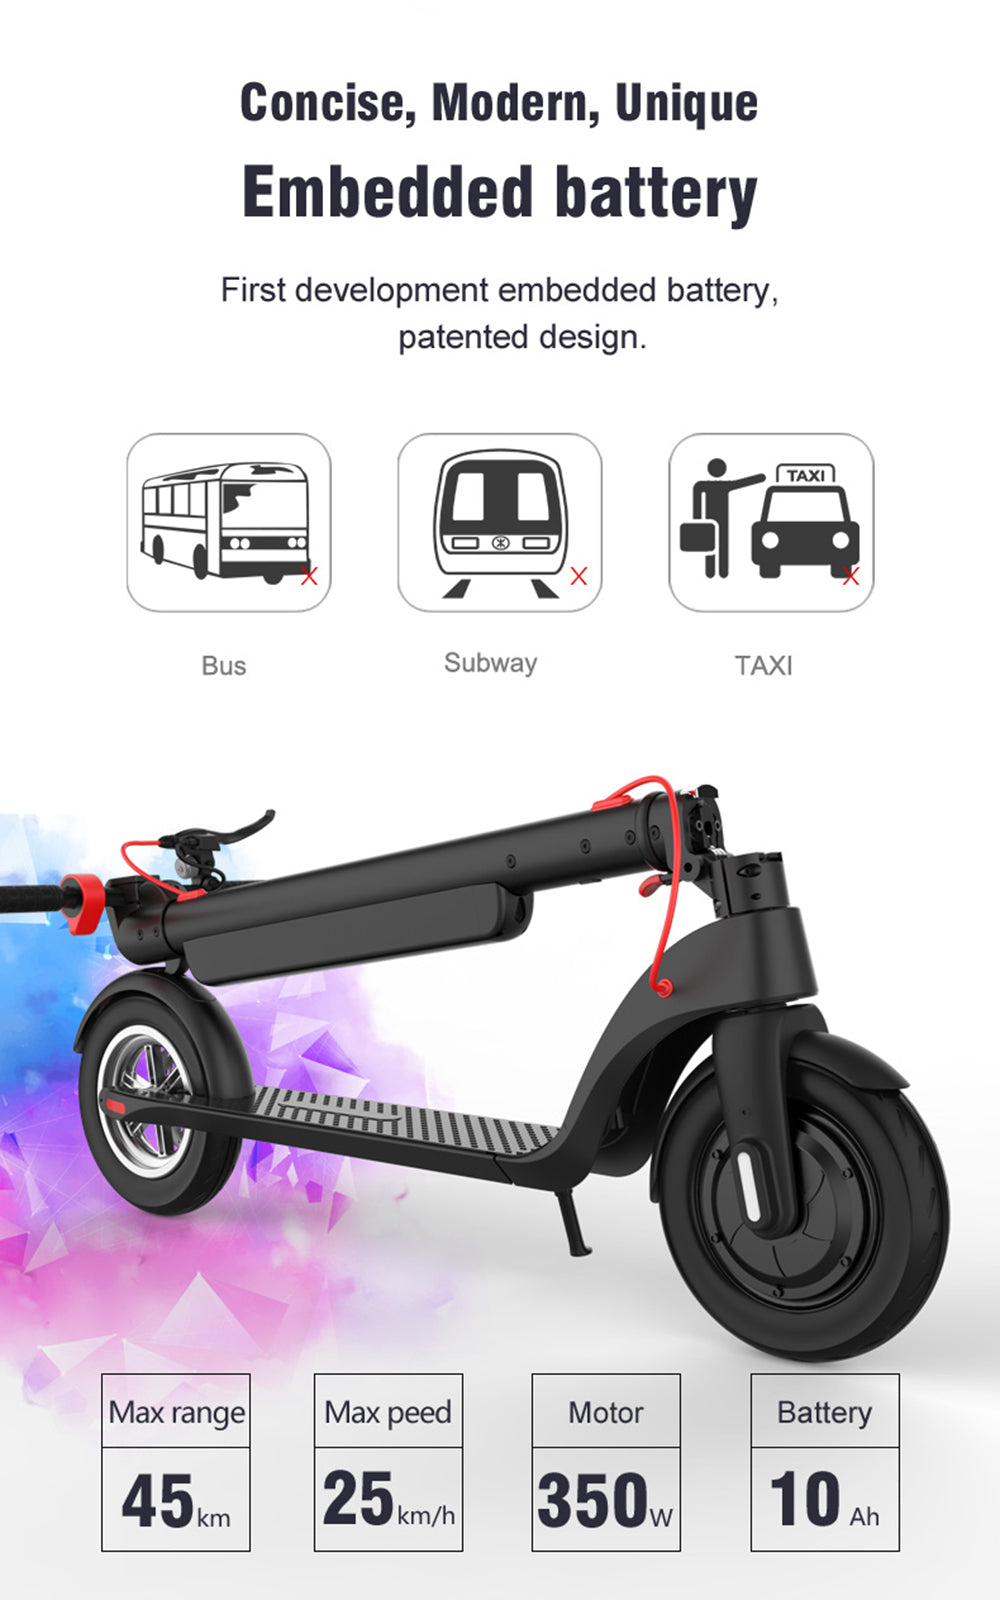 10" Folding Electric Scooter 350W 45KM Range For Adult City Commute